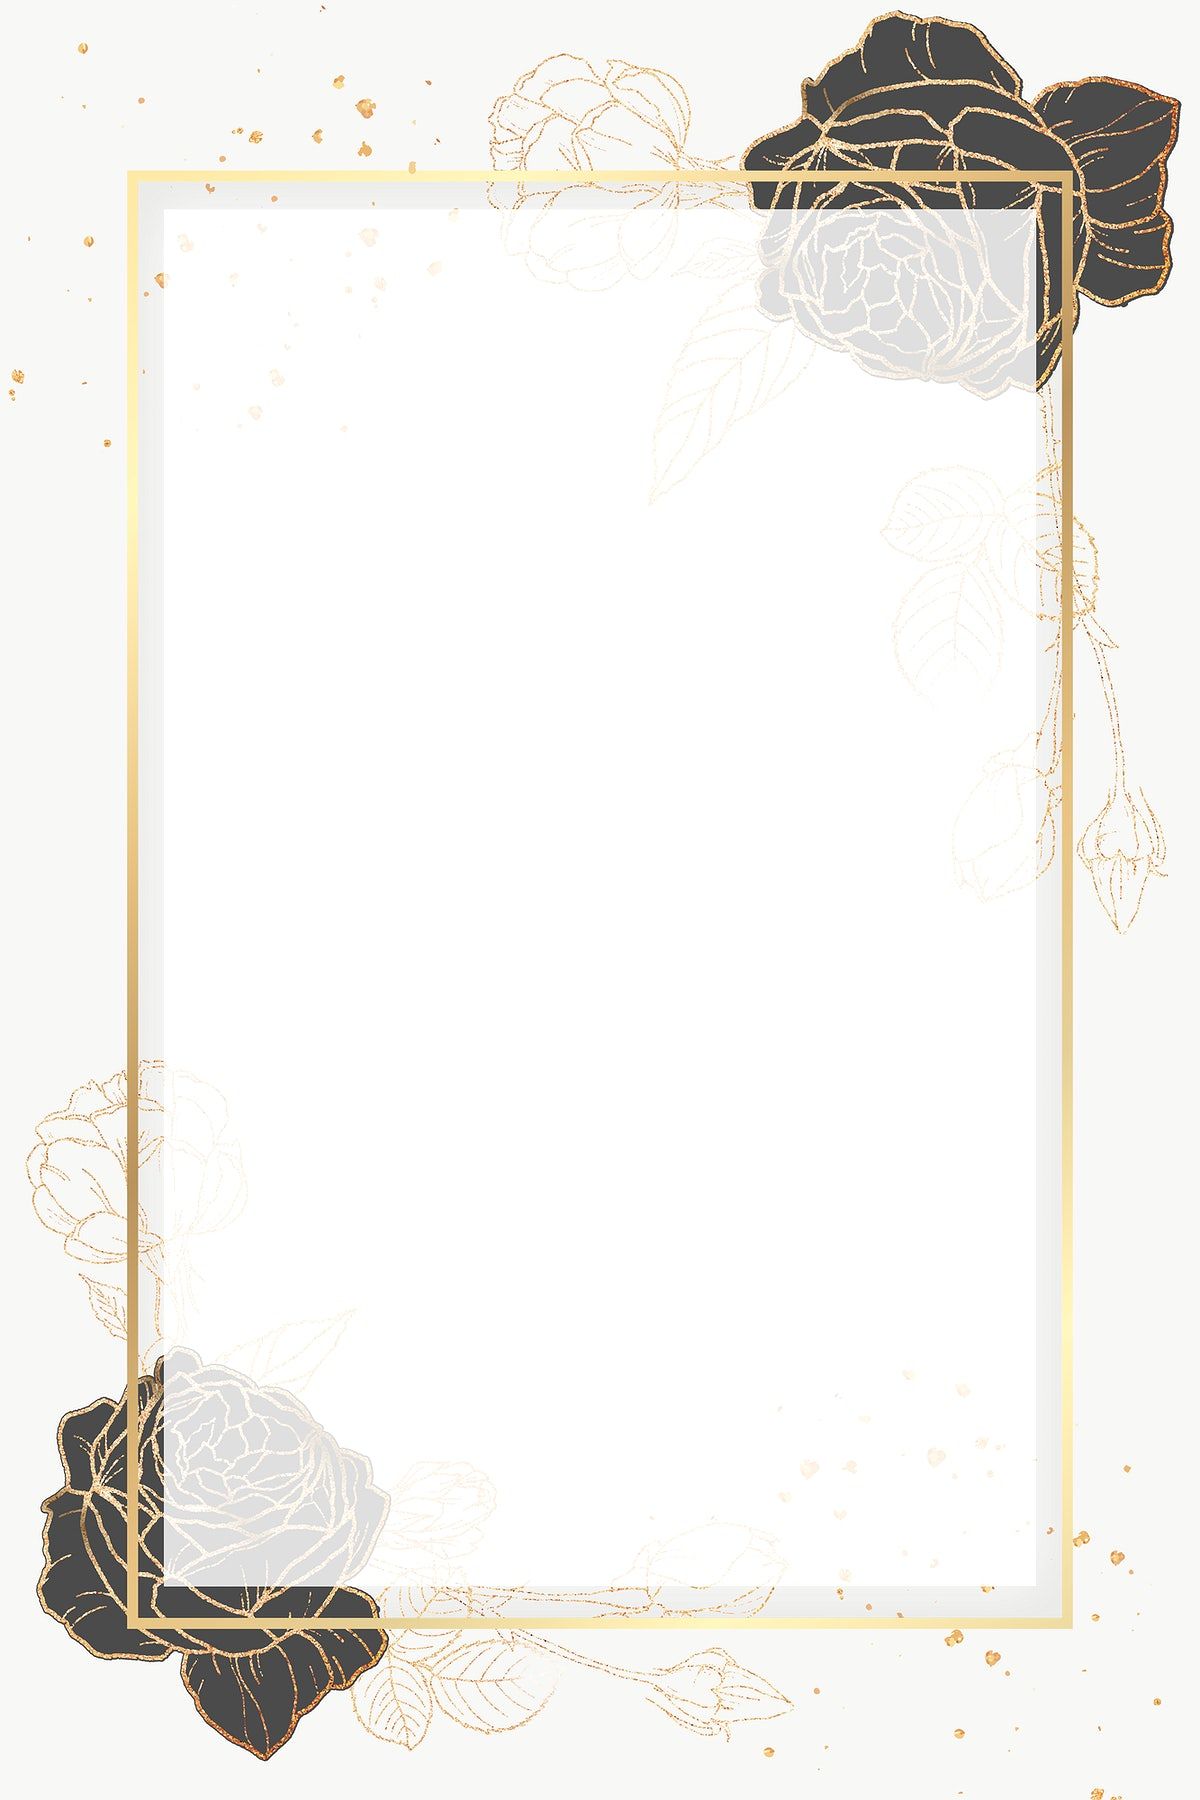 Download free png of Gold frame with black roses design element by taus about invitation card,...jpg